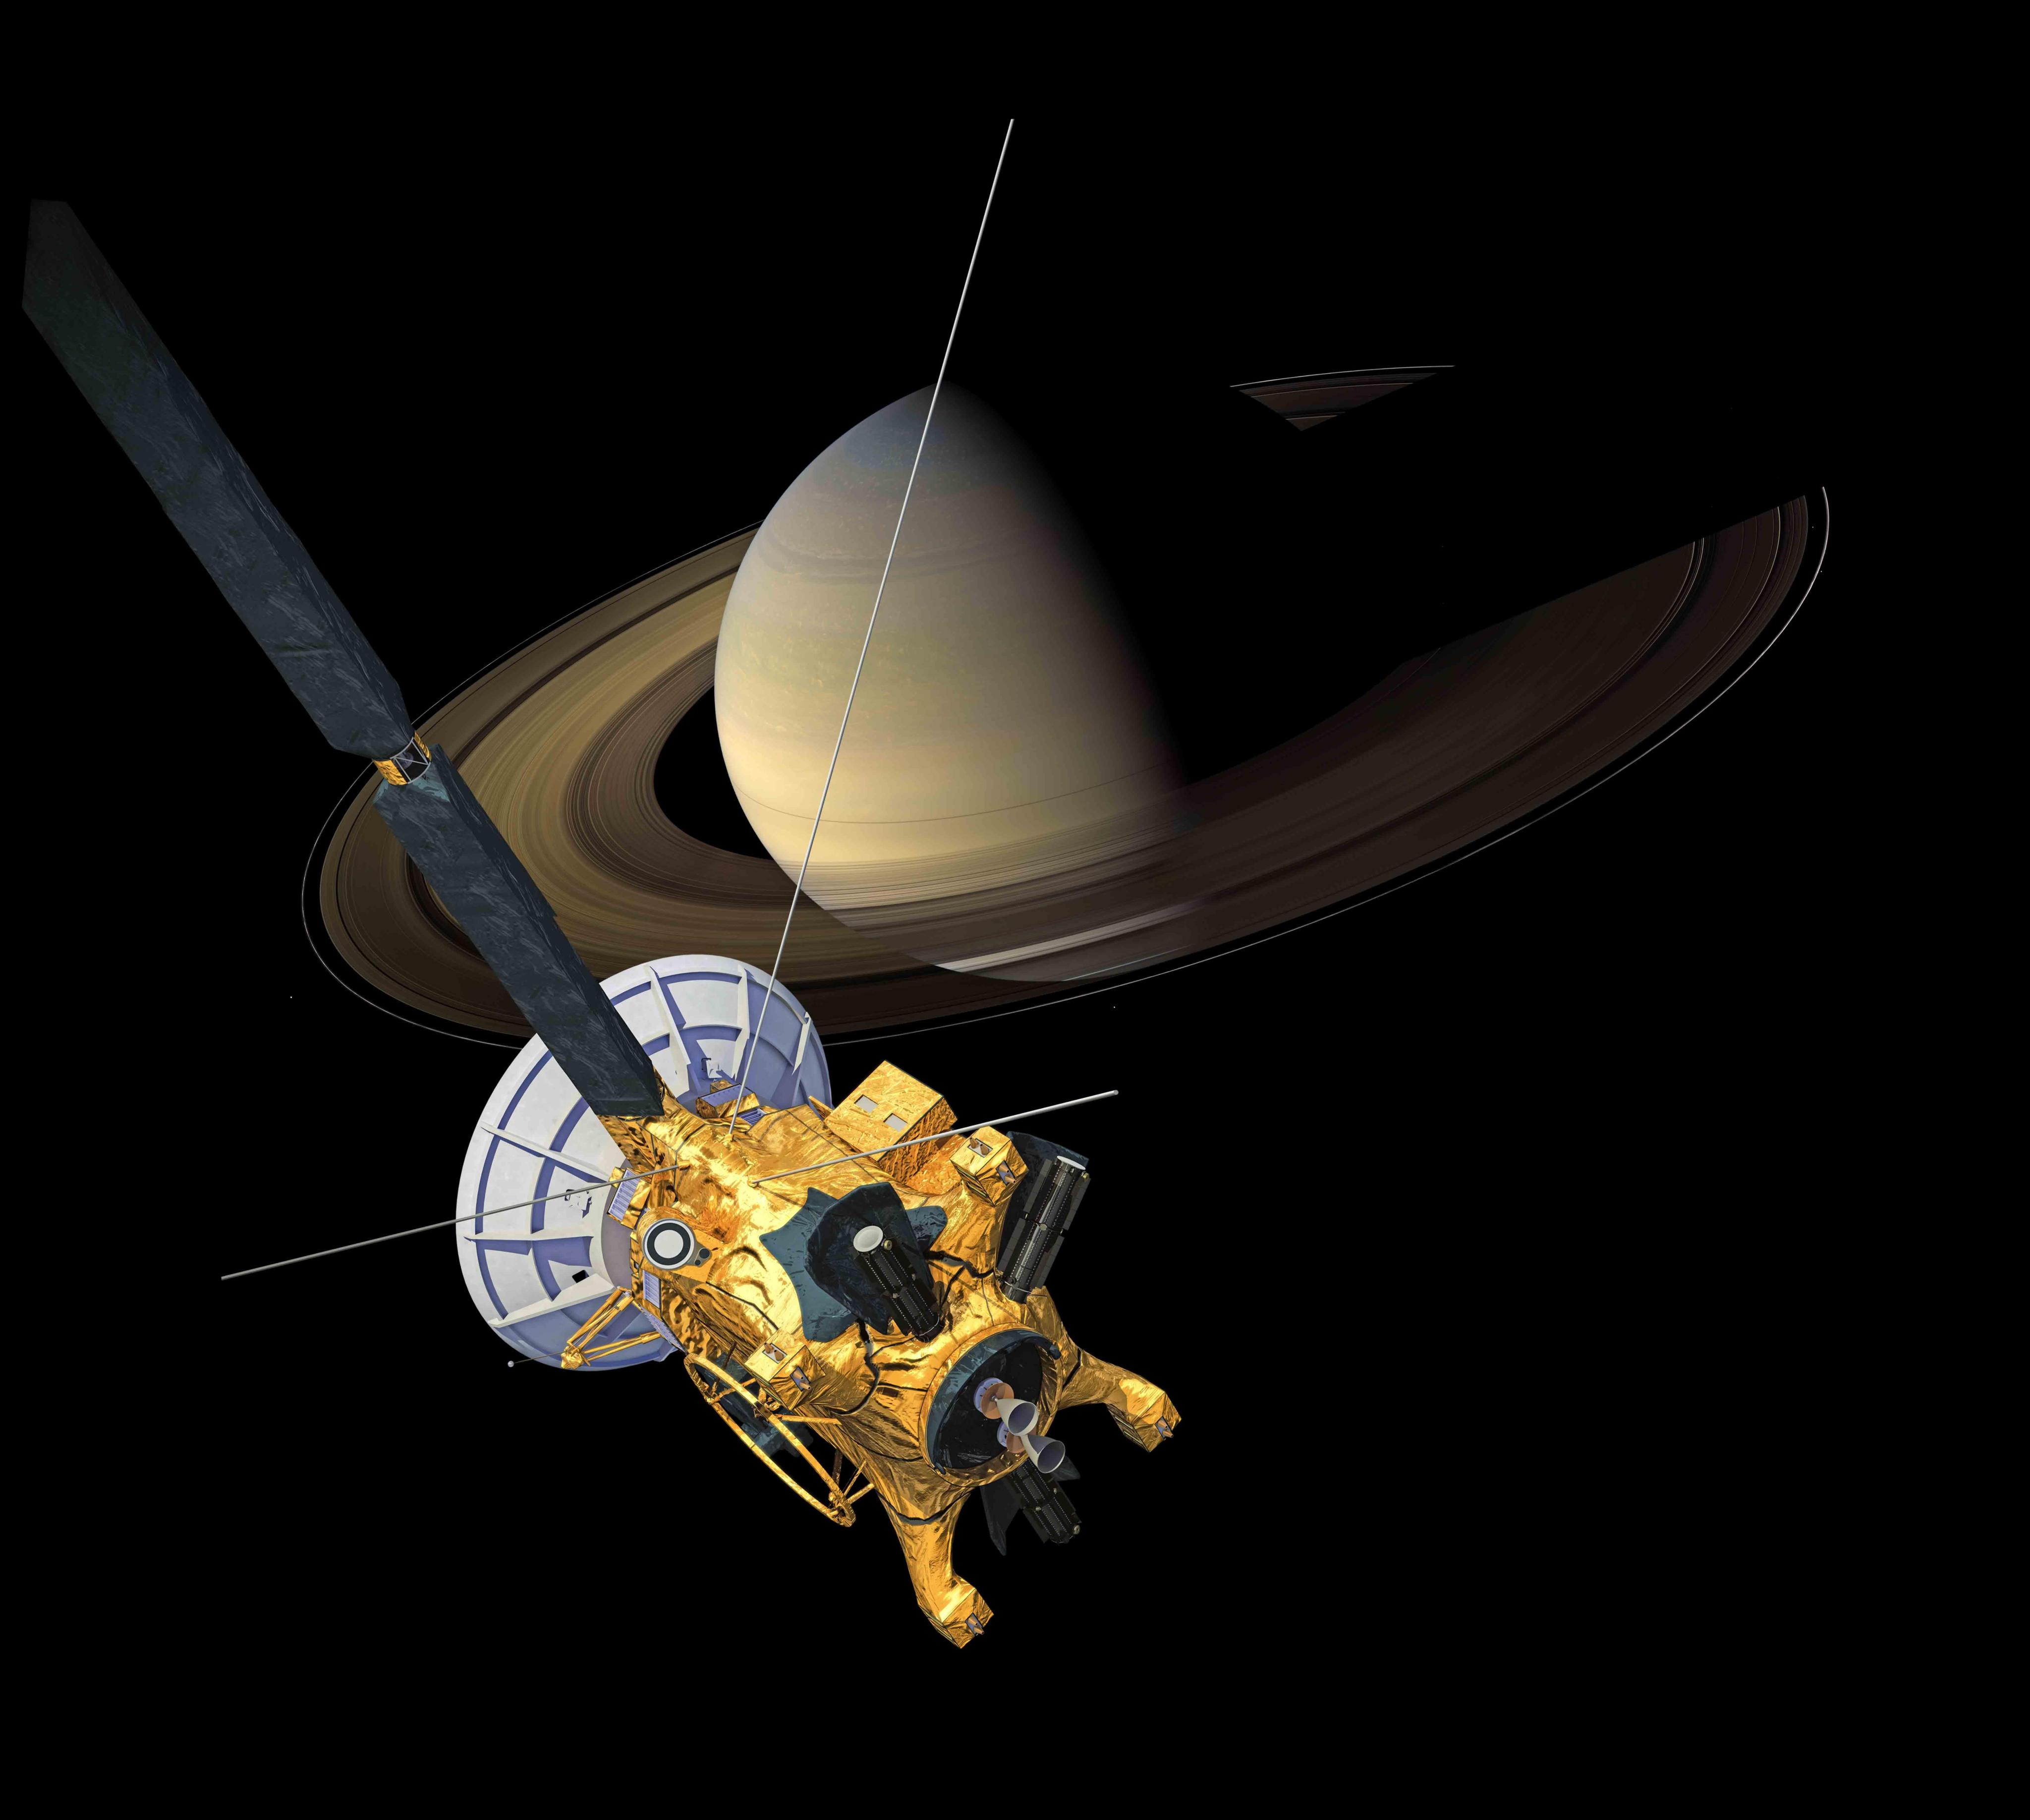 Saturn's shadow passes over its rings as the Cassini spacecraft looks on in this artist's concept.